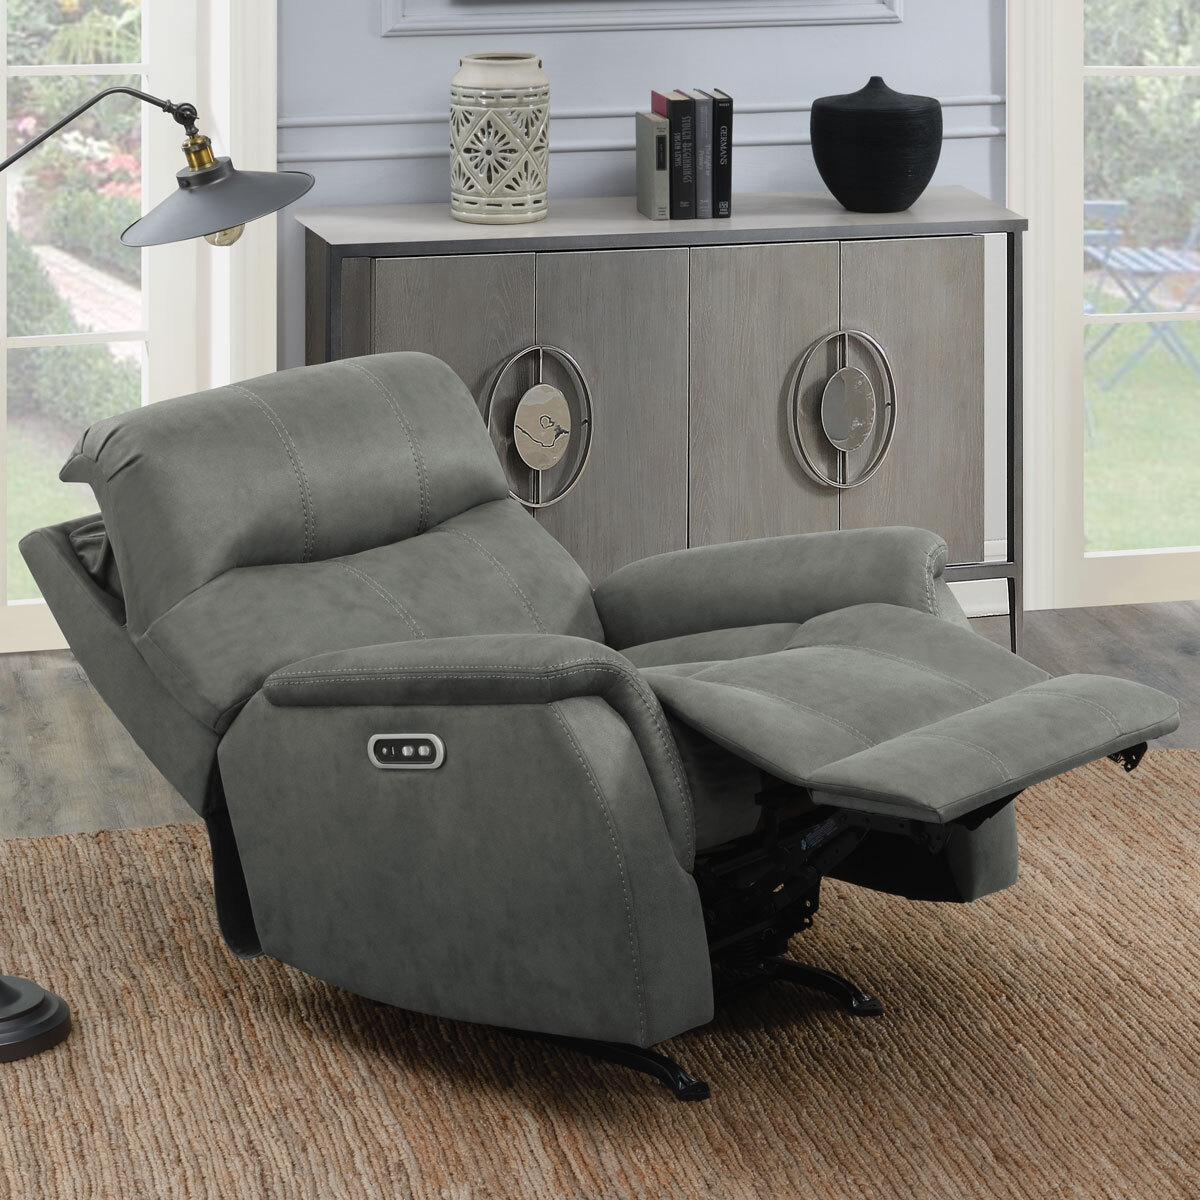 Lifestyle Image of Esme Barcalounger Grey Fabric Rocker Power Recliner, Reclined